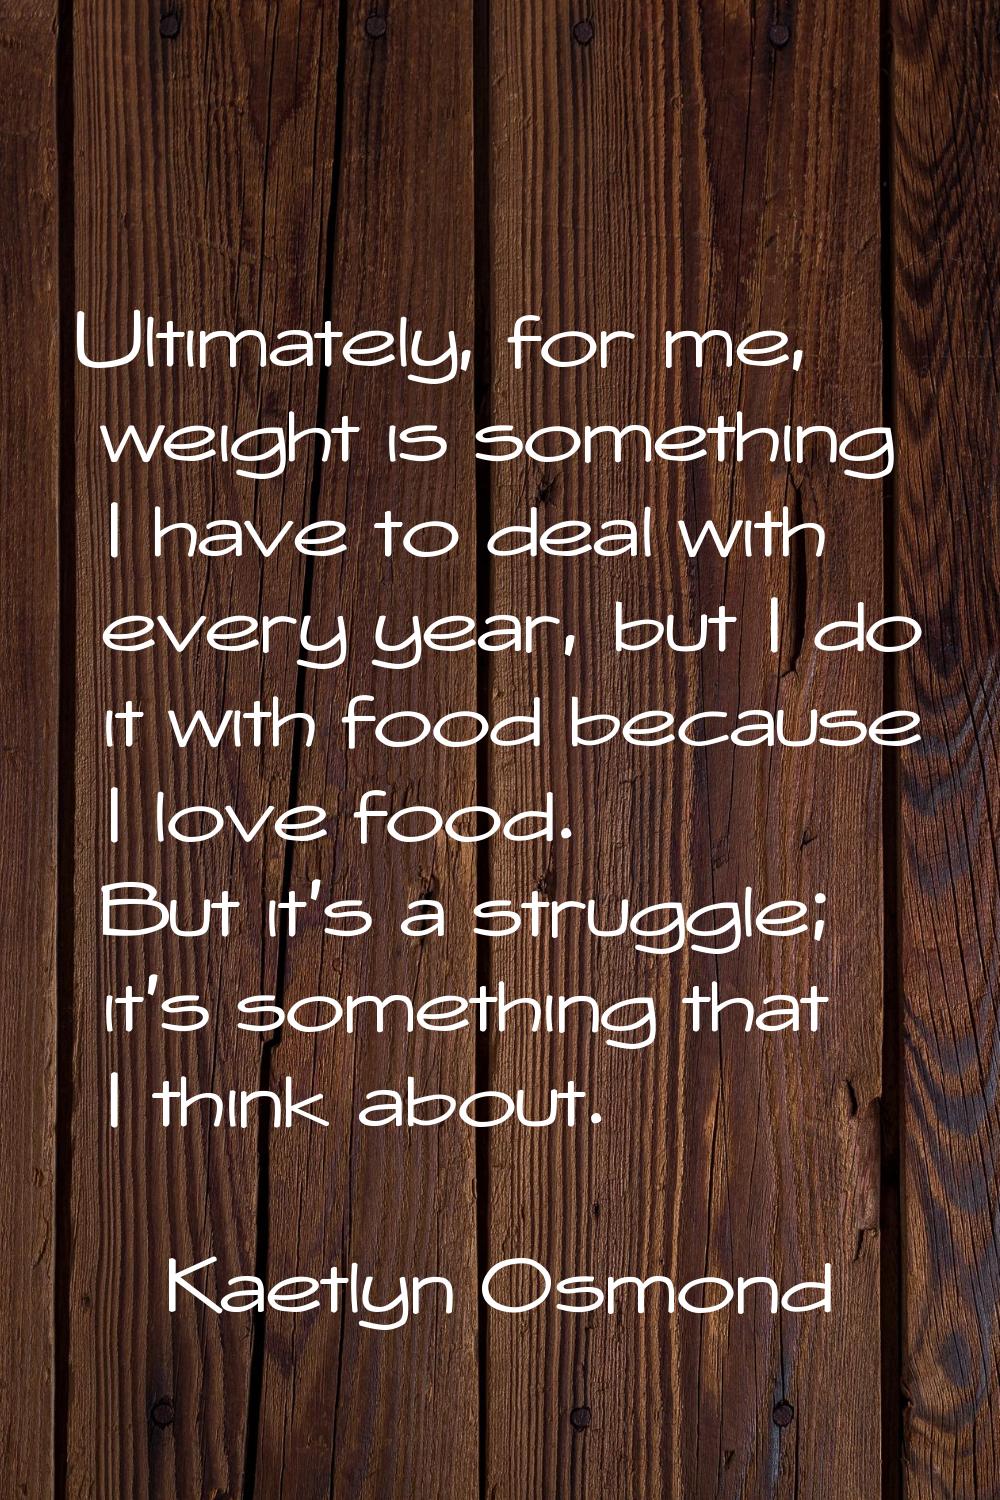 Ultimately, for me, weight is something I have to deal with every year, but I do it with food becau